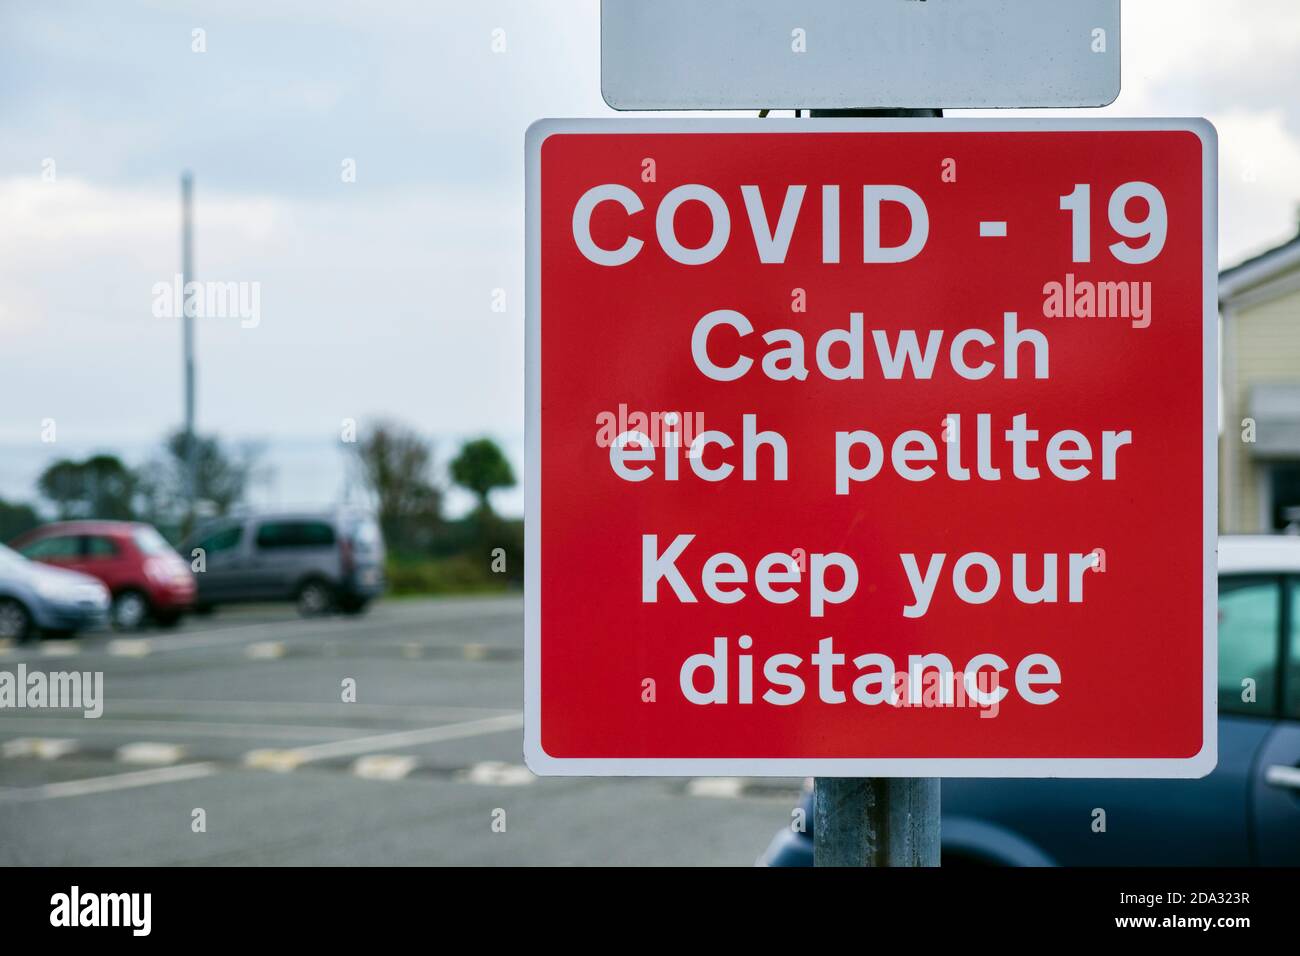 Coronavirus pandemic Covid-19 bilingual sign warning Keep your distance in English and Cadwch eich pellter in Welsh. Anglesey north Wales UK Britain Stock Photo